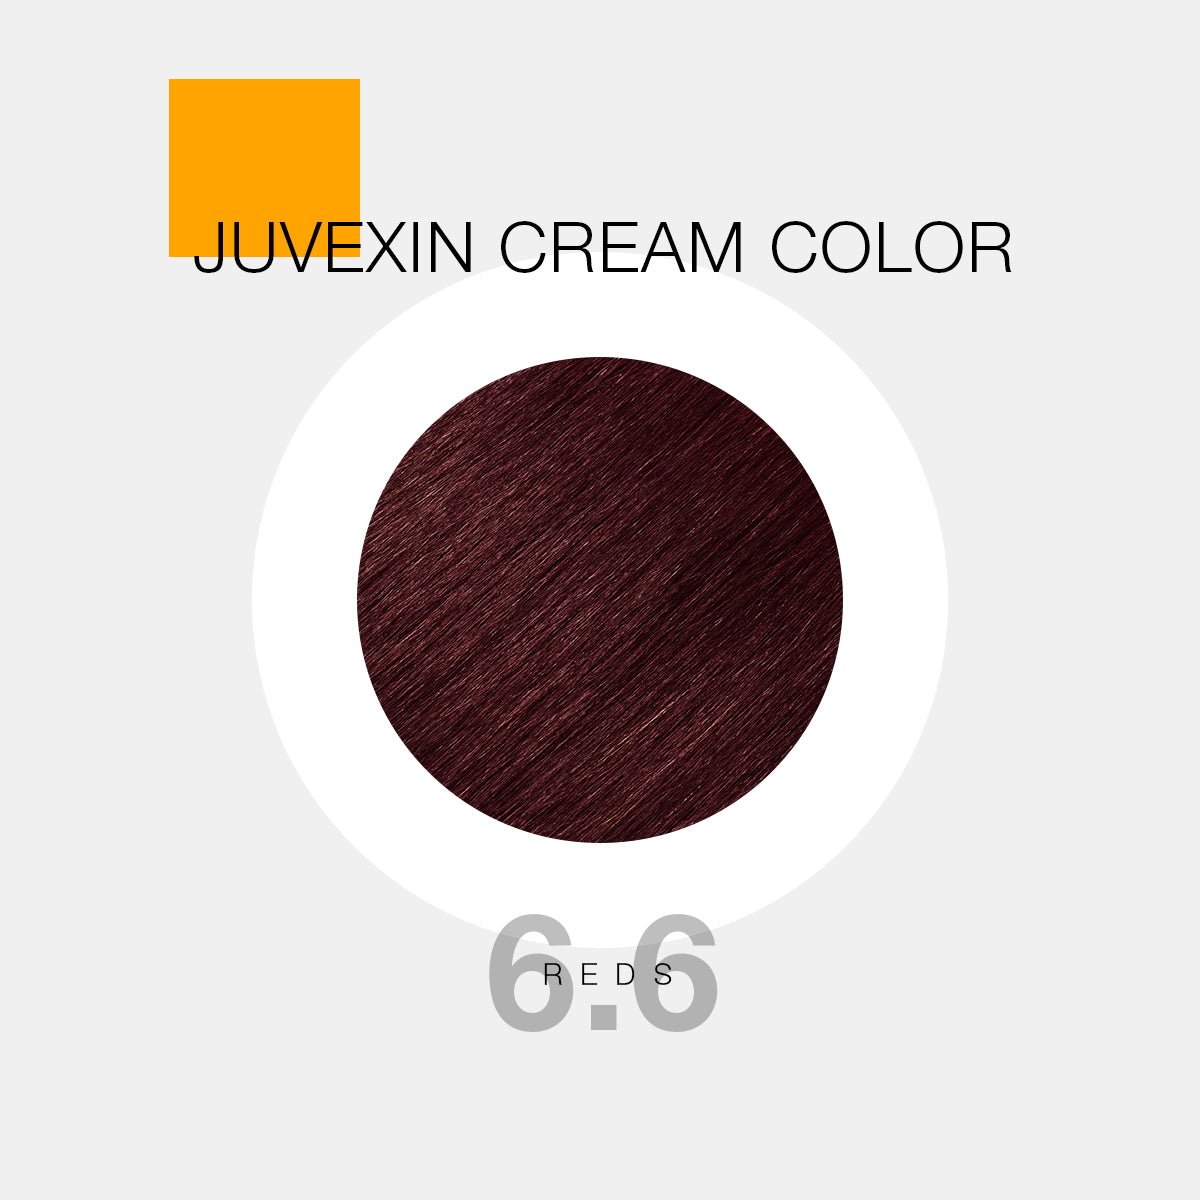 Juvexin Cream Color Pro Reds